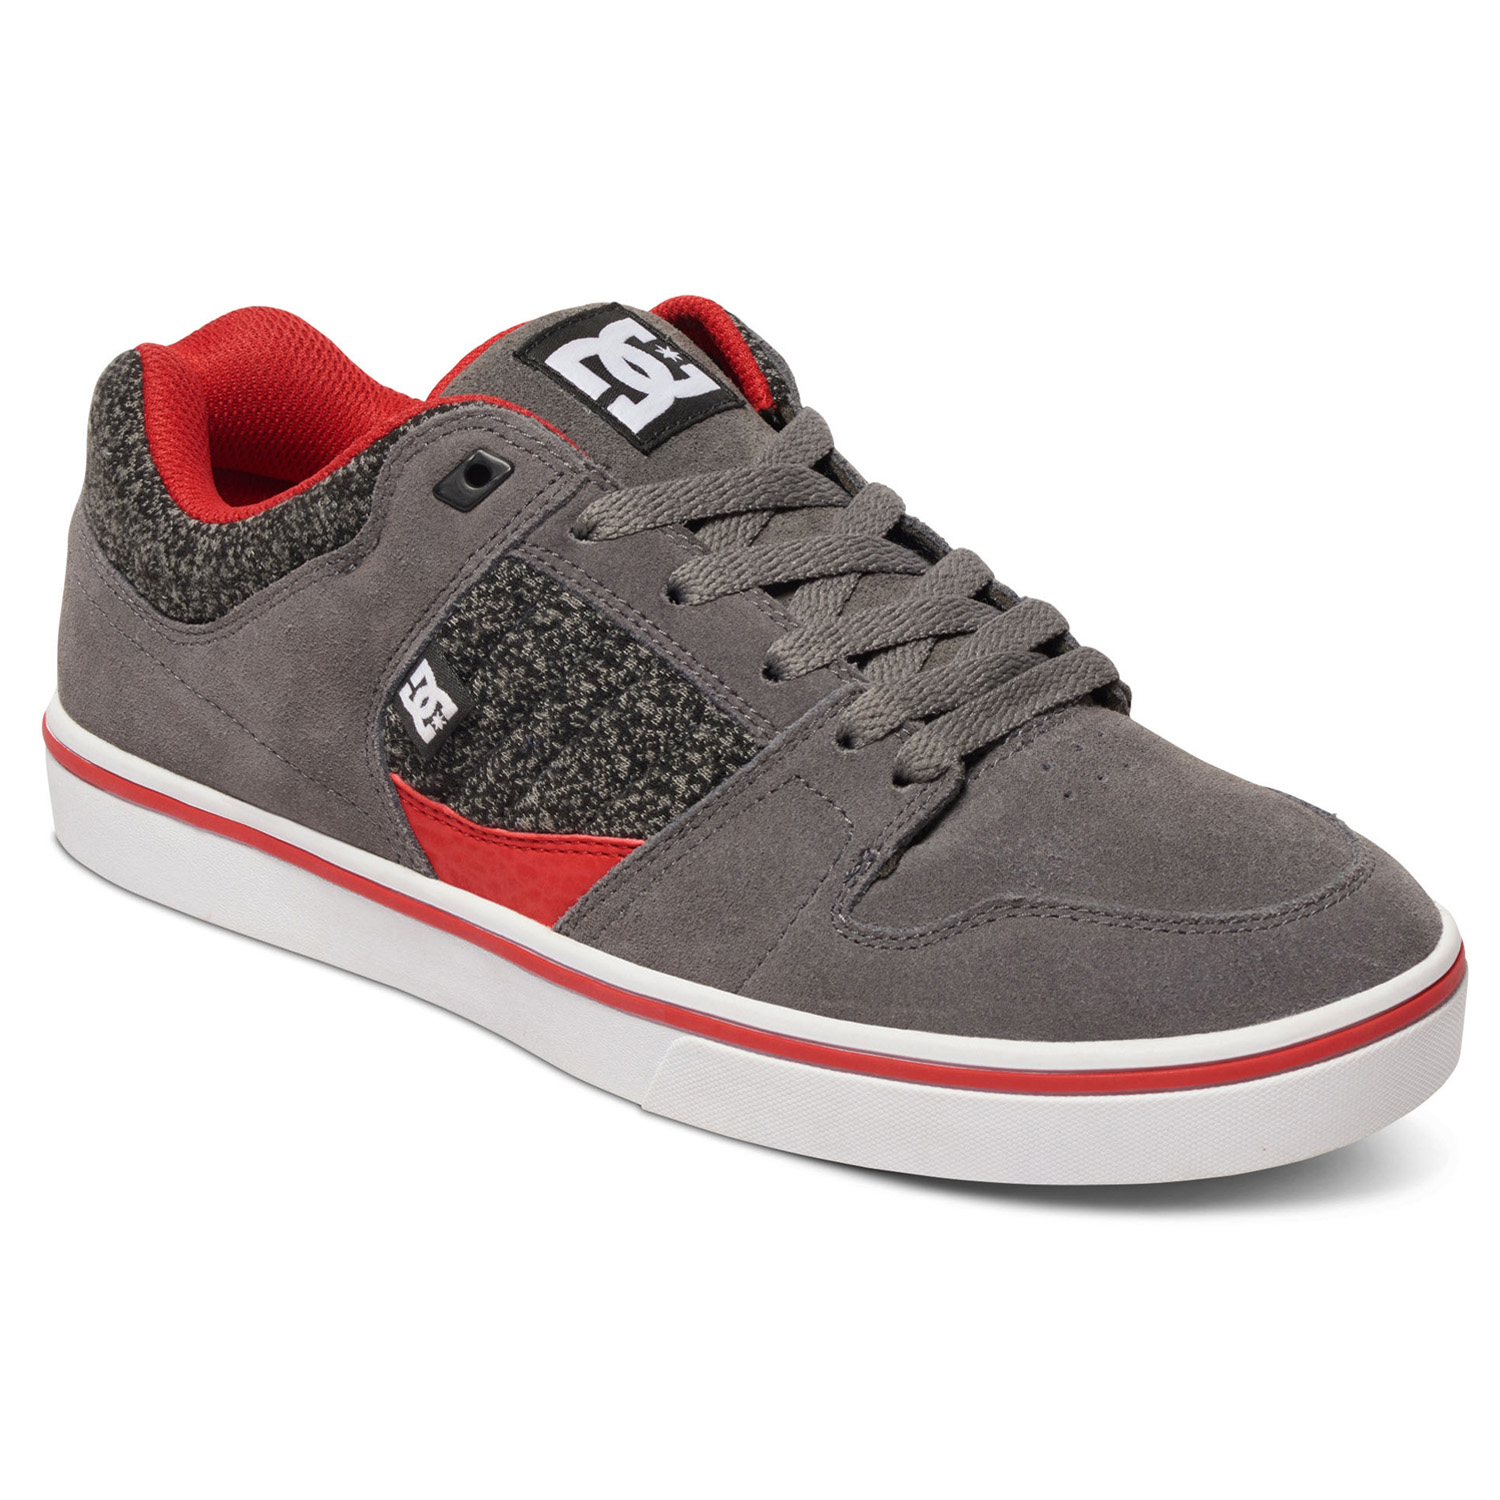 DC Chaussures Course 2 Grey/Black/Red